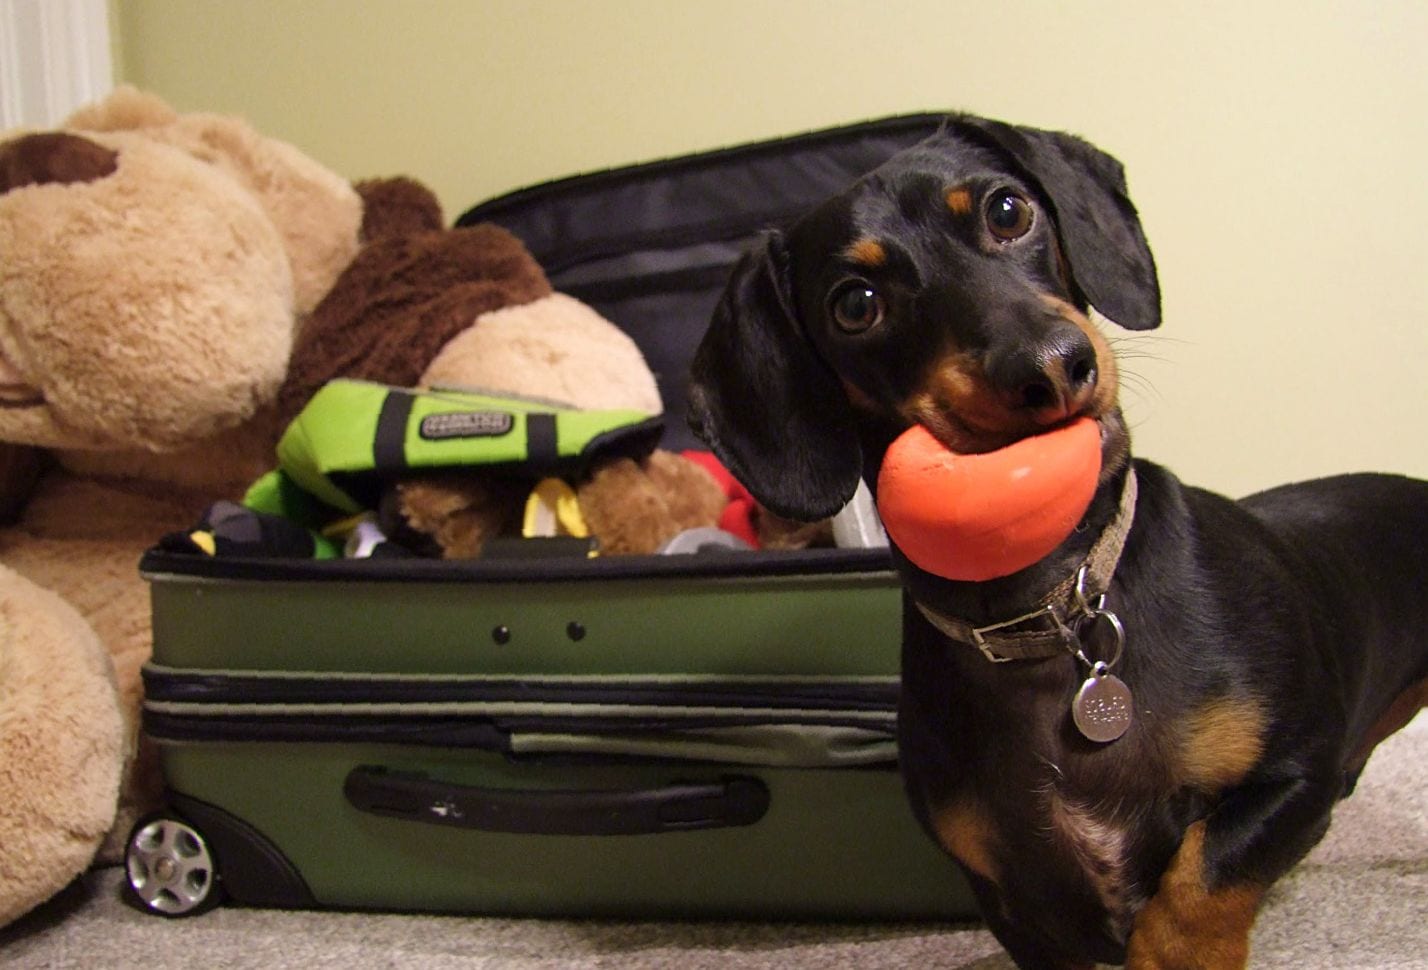 A Dachshund with a ball in its mouth standing on the floor in front of the suitcase with its toys